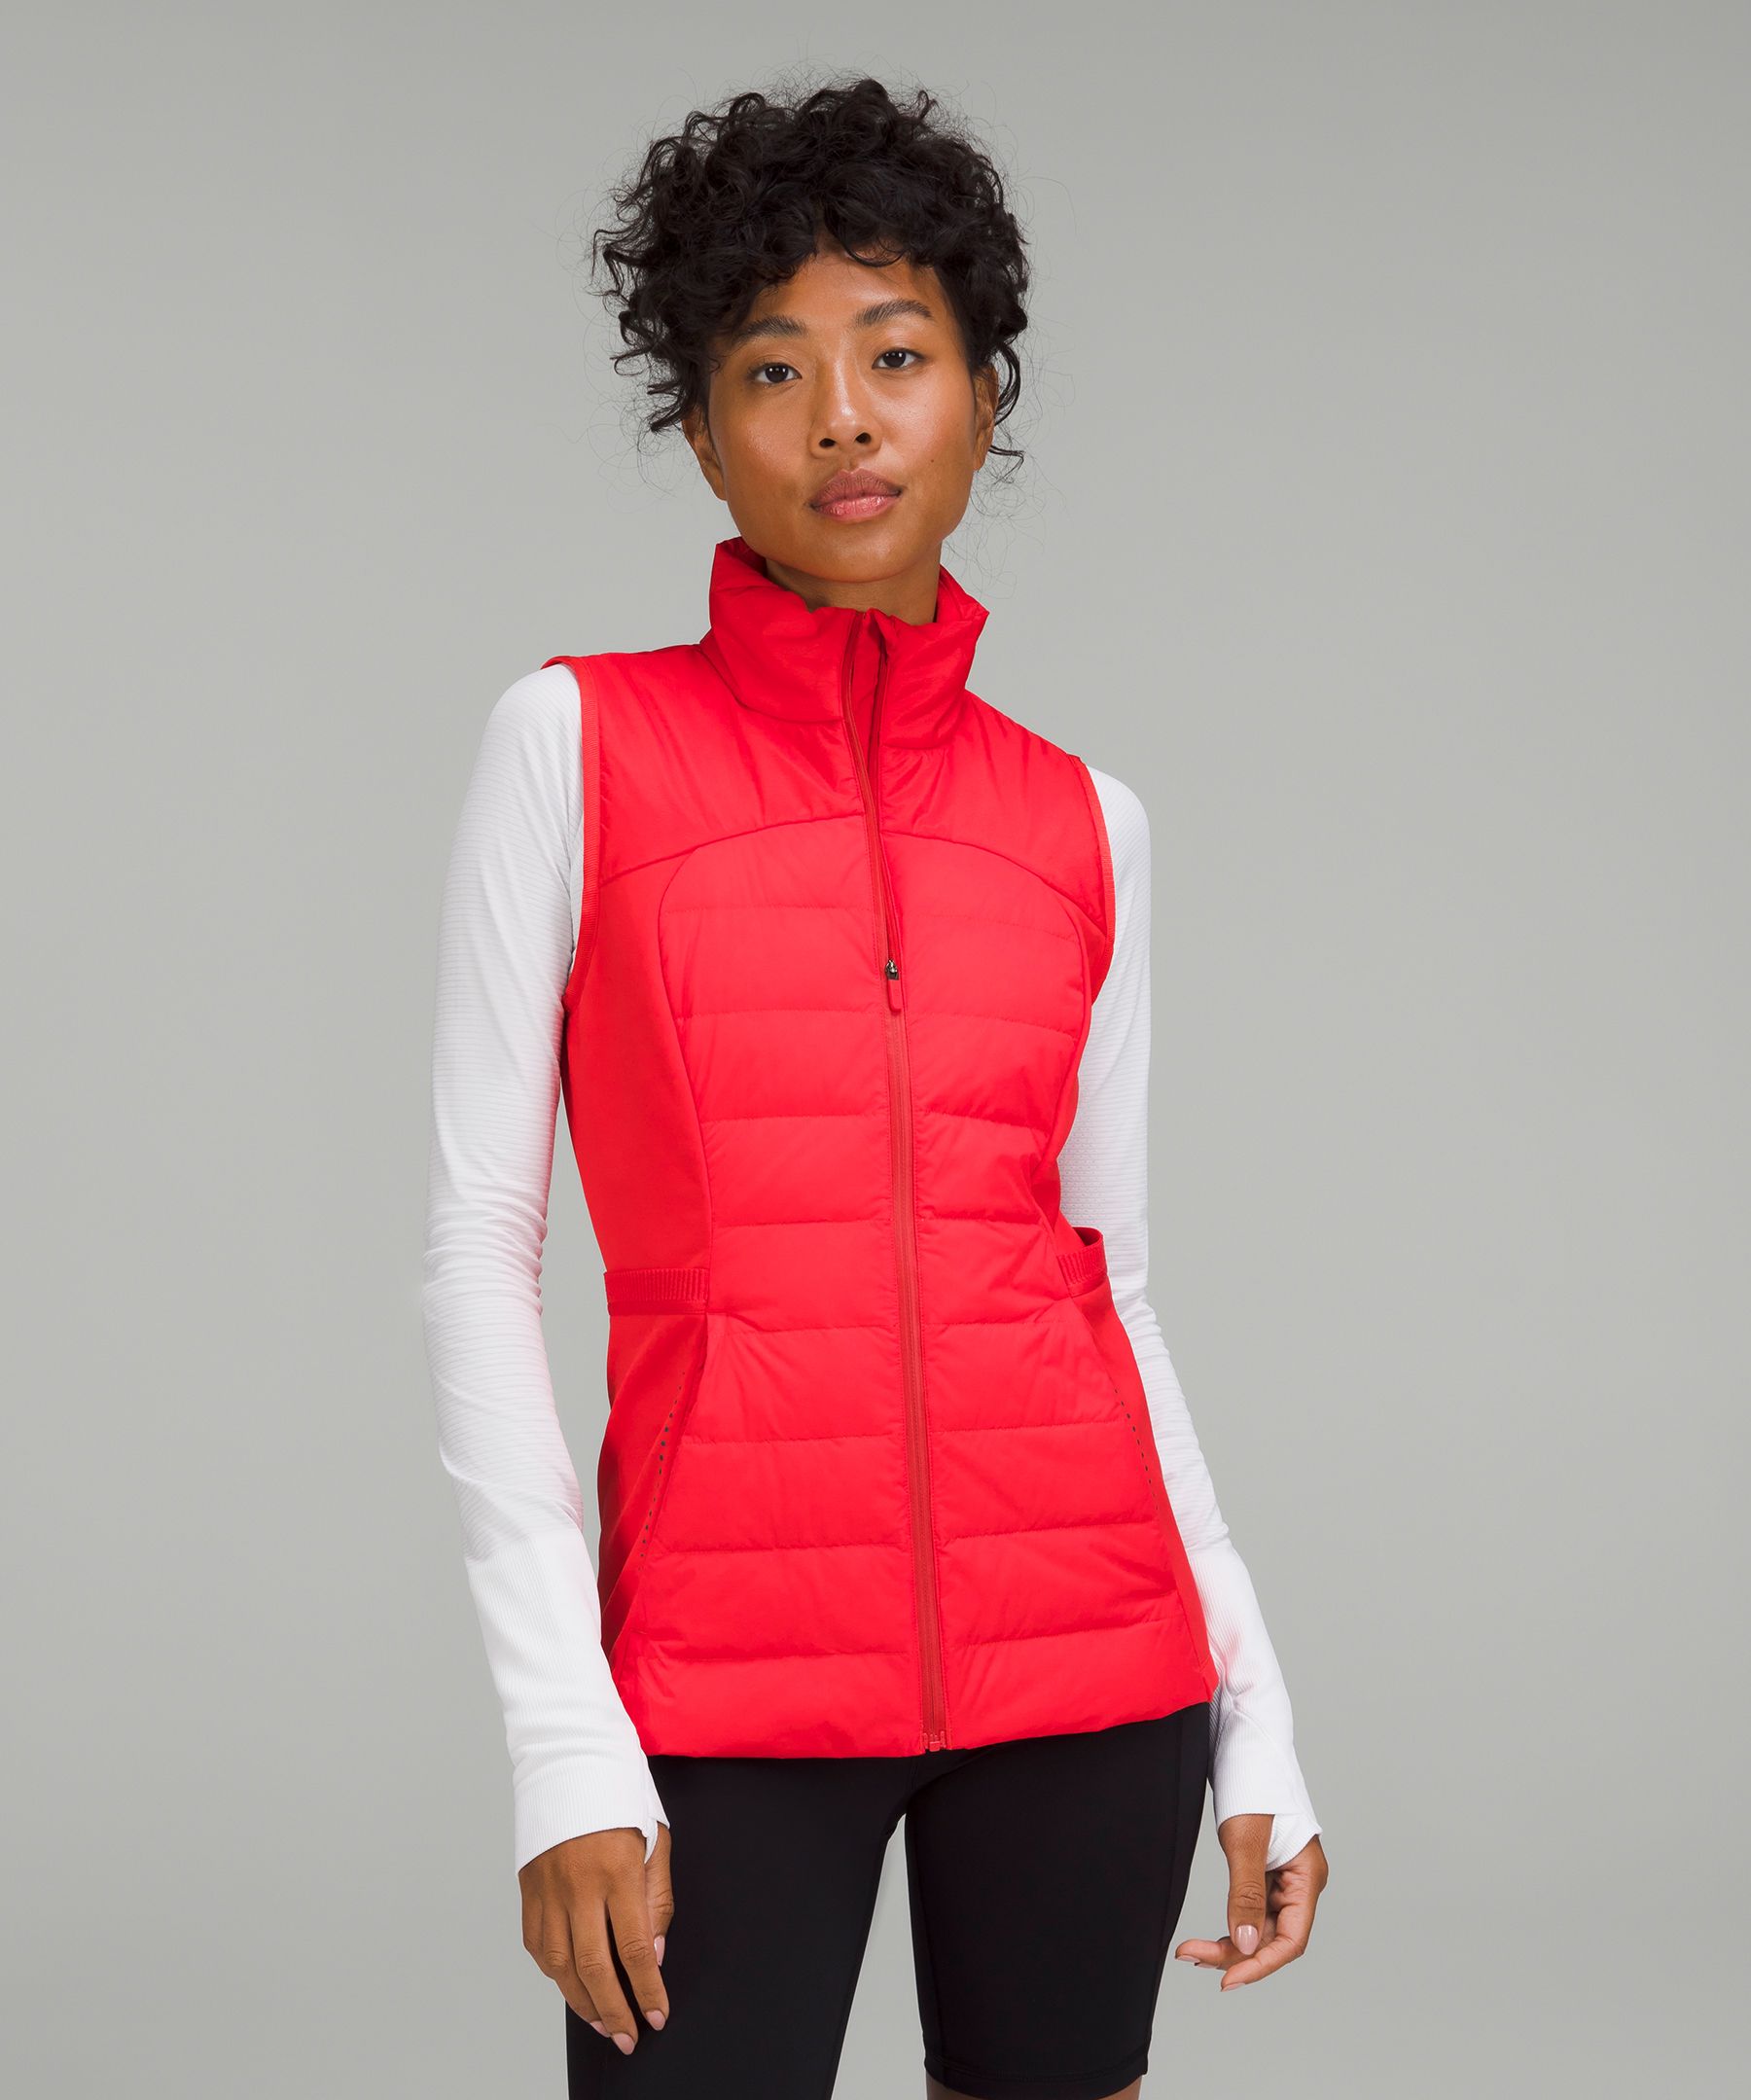 Down for It All Vest | Coats and Jackets | Lululemon UK